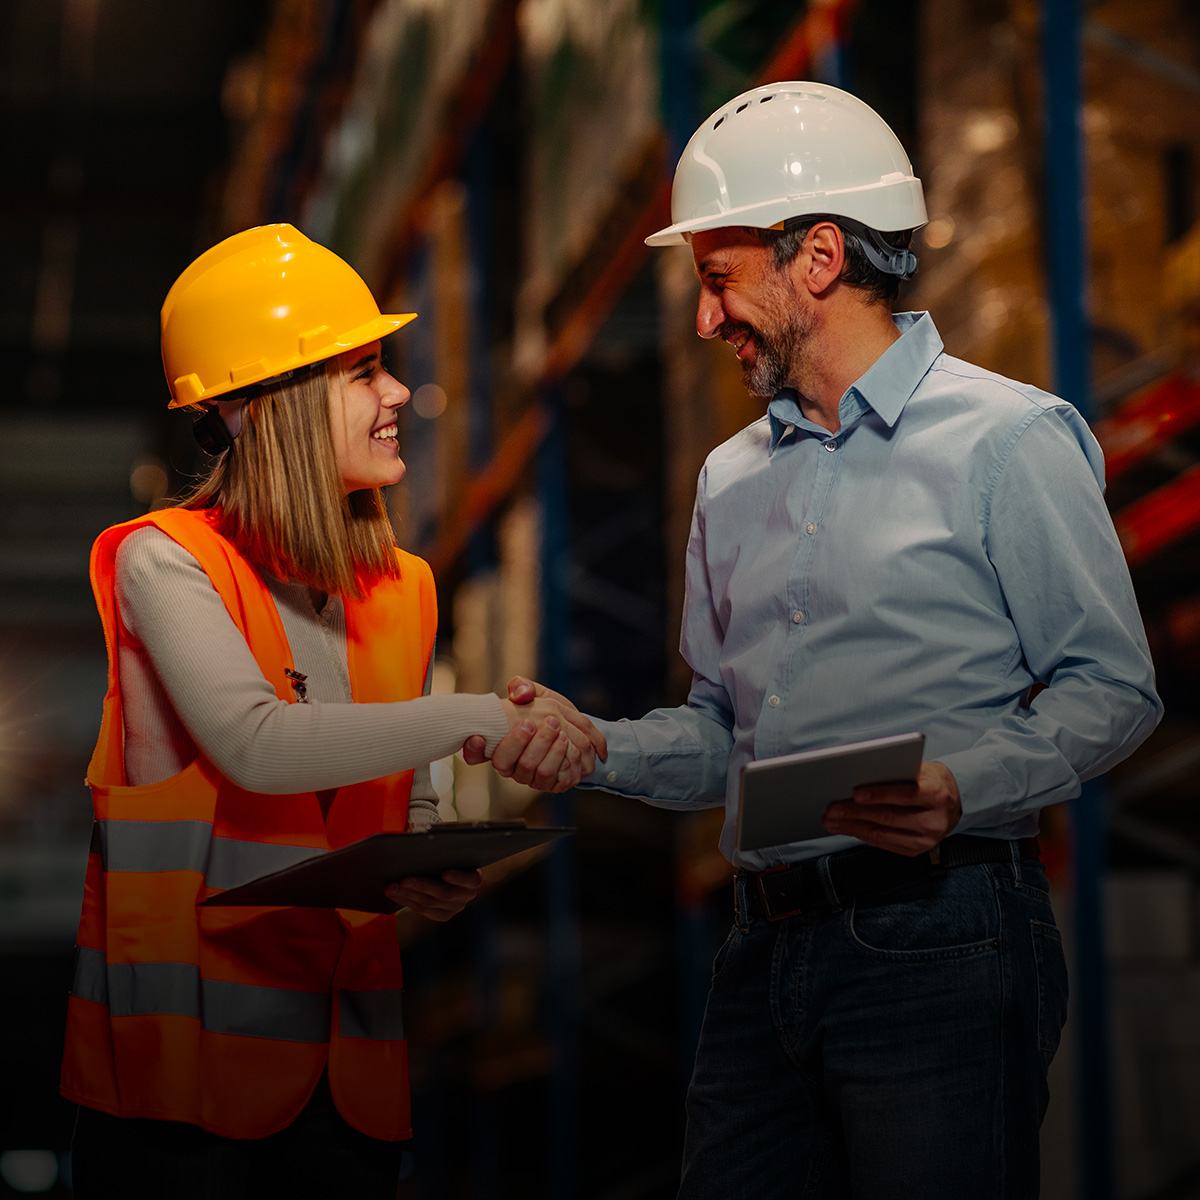 Two customer-focused workers in hard hats shaking hands in a warehouse, smiling, with one holding a digital tablet.